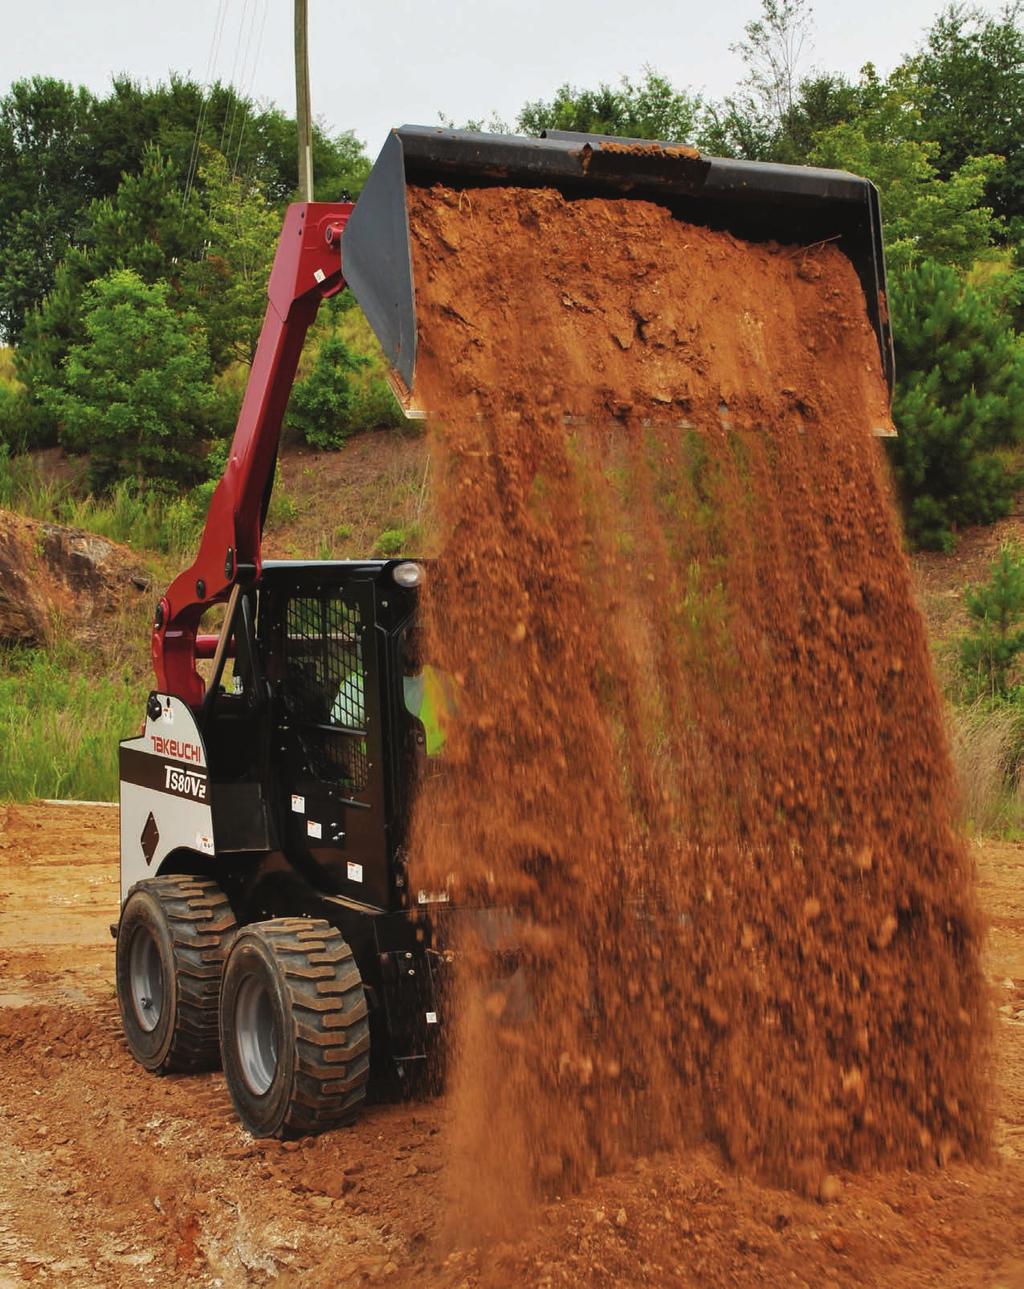 Those in the know, know Takeuchi TS80V2 Skid